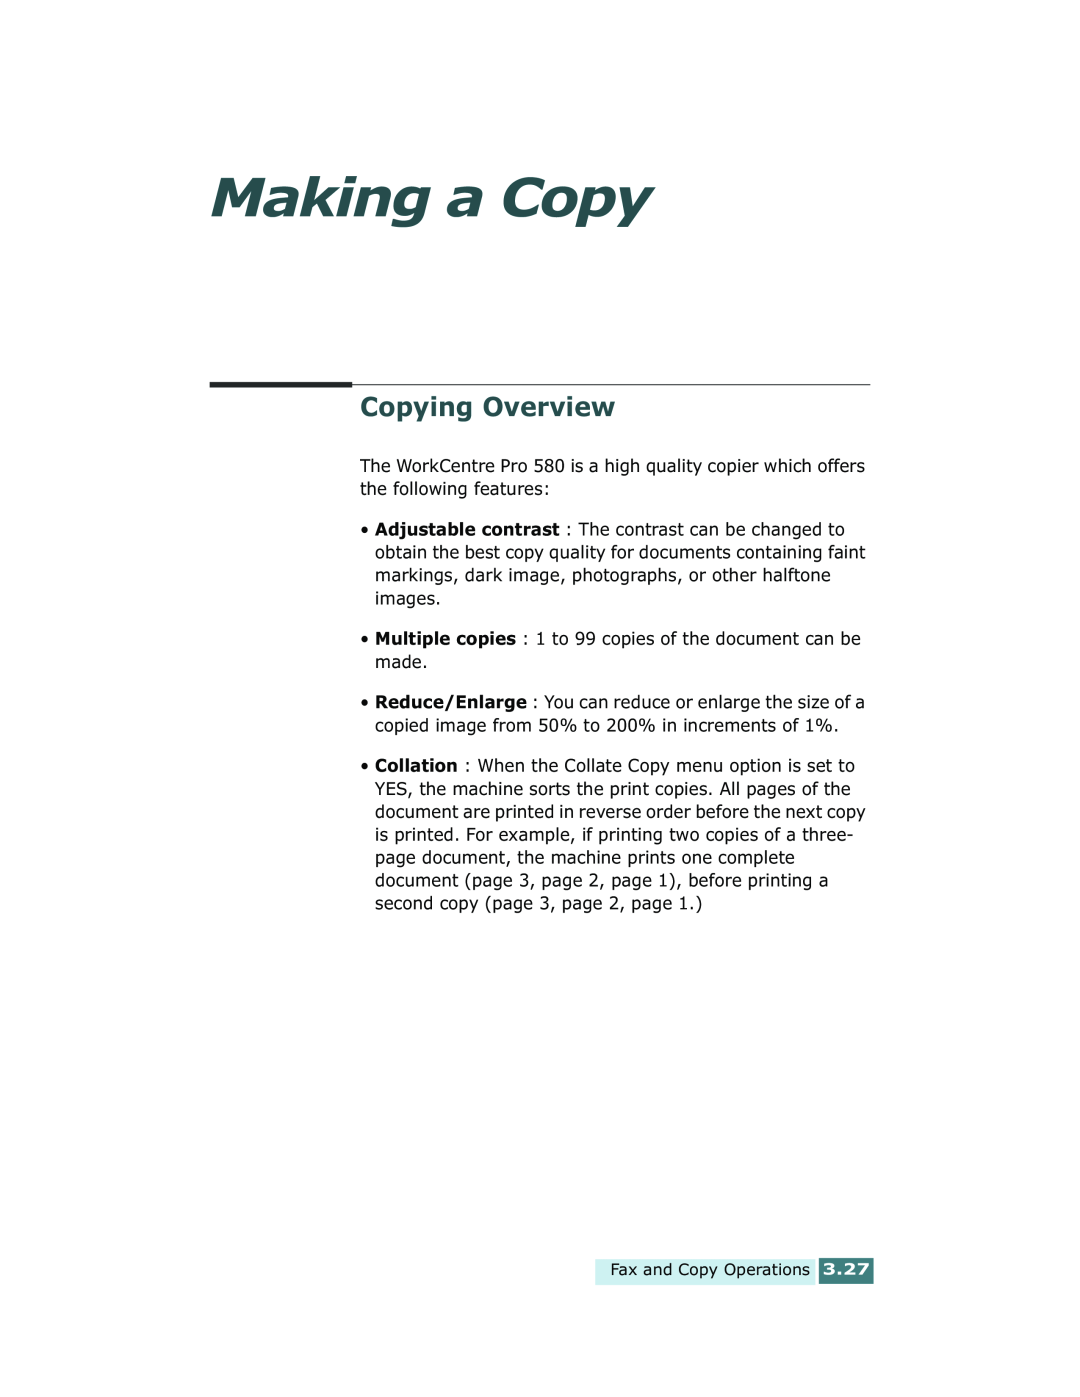 Xerox Pro 580 manual Making a Copy, Copying Overview 